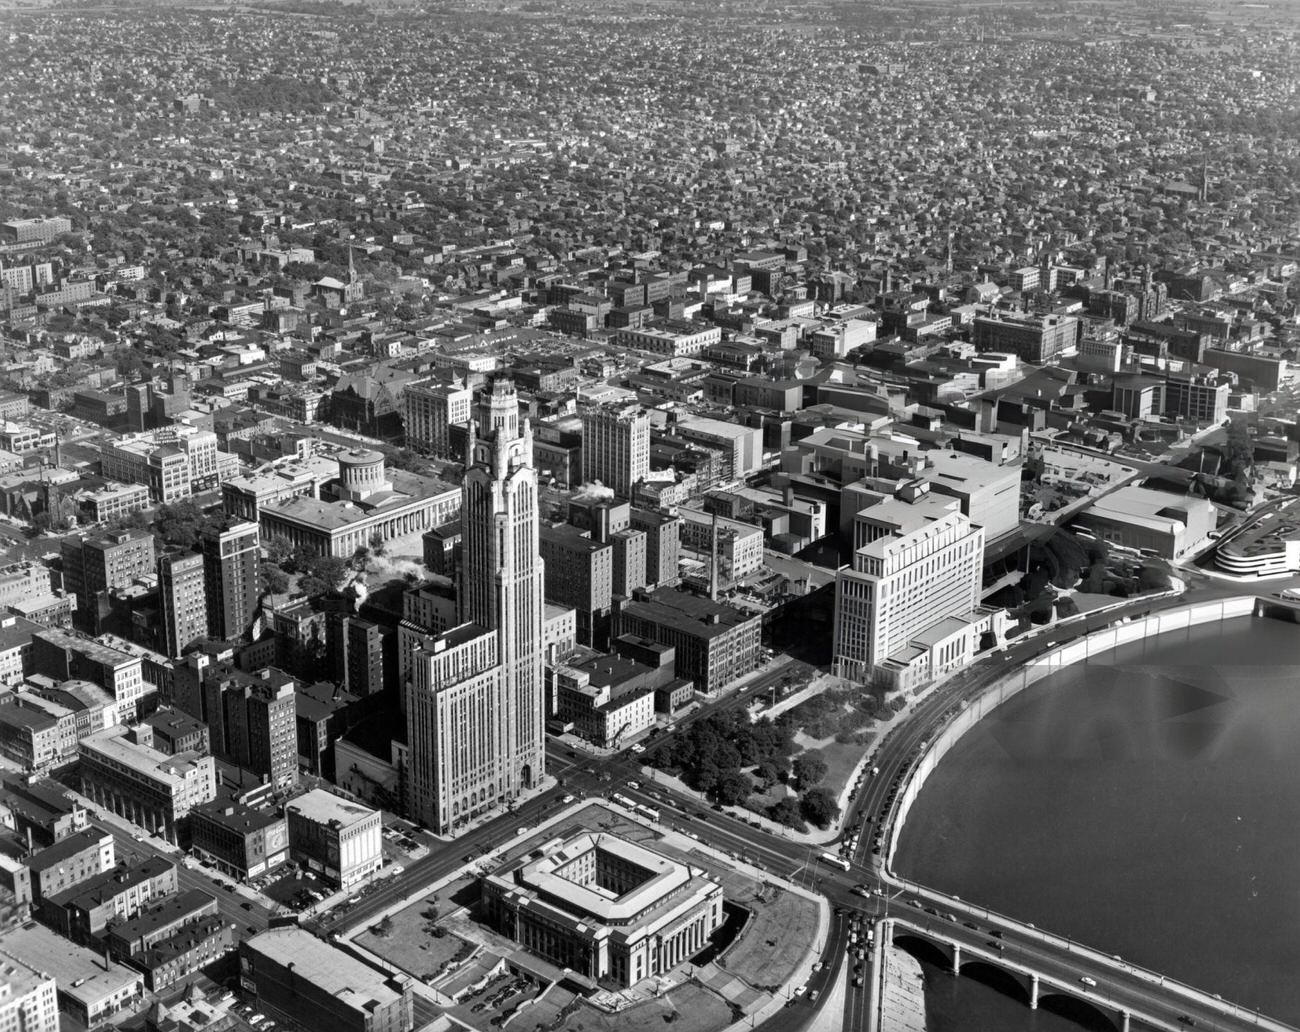 Aerial view of downtown Columbus, Ohio, looking southeast with City Hall, LeVeque-Lincoln Tower, and Departments of State Building in the foreground, 1955